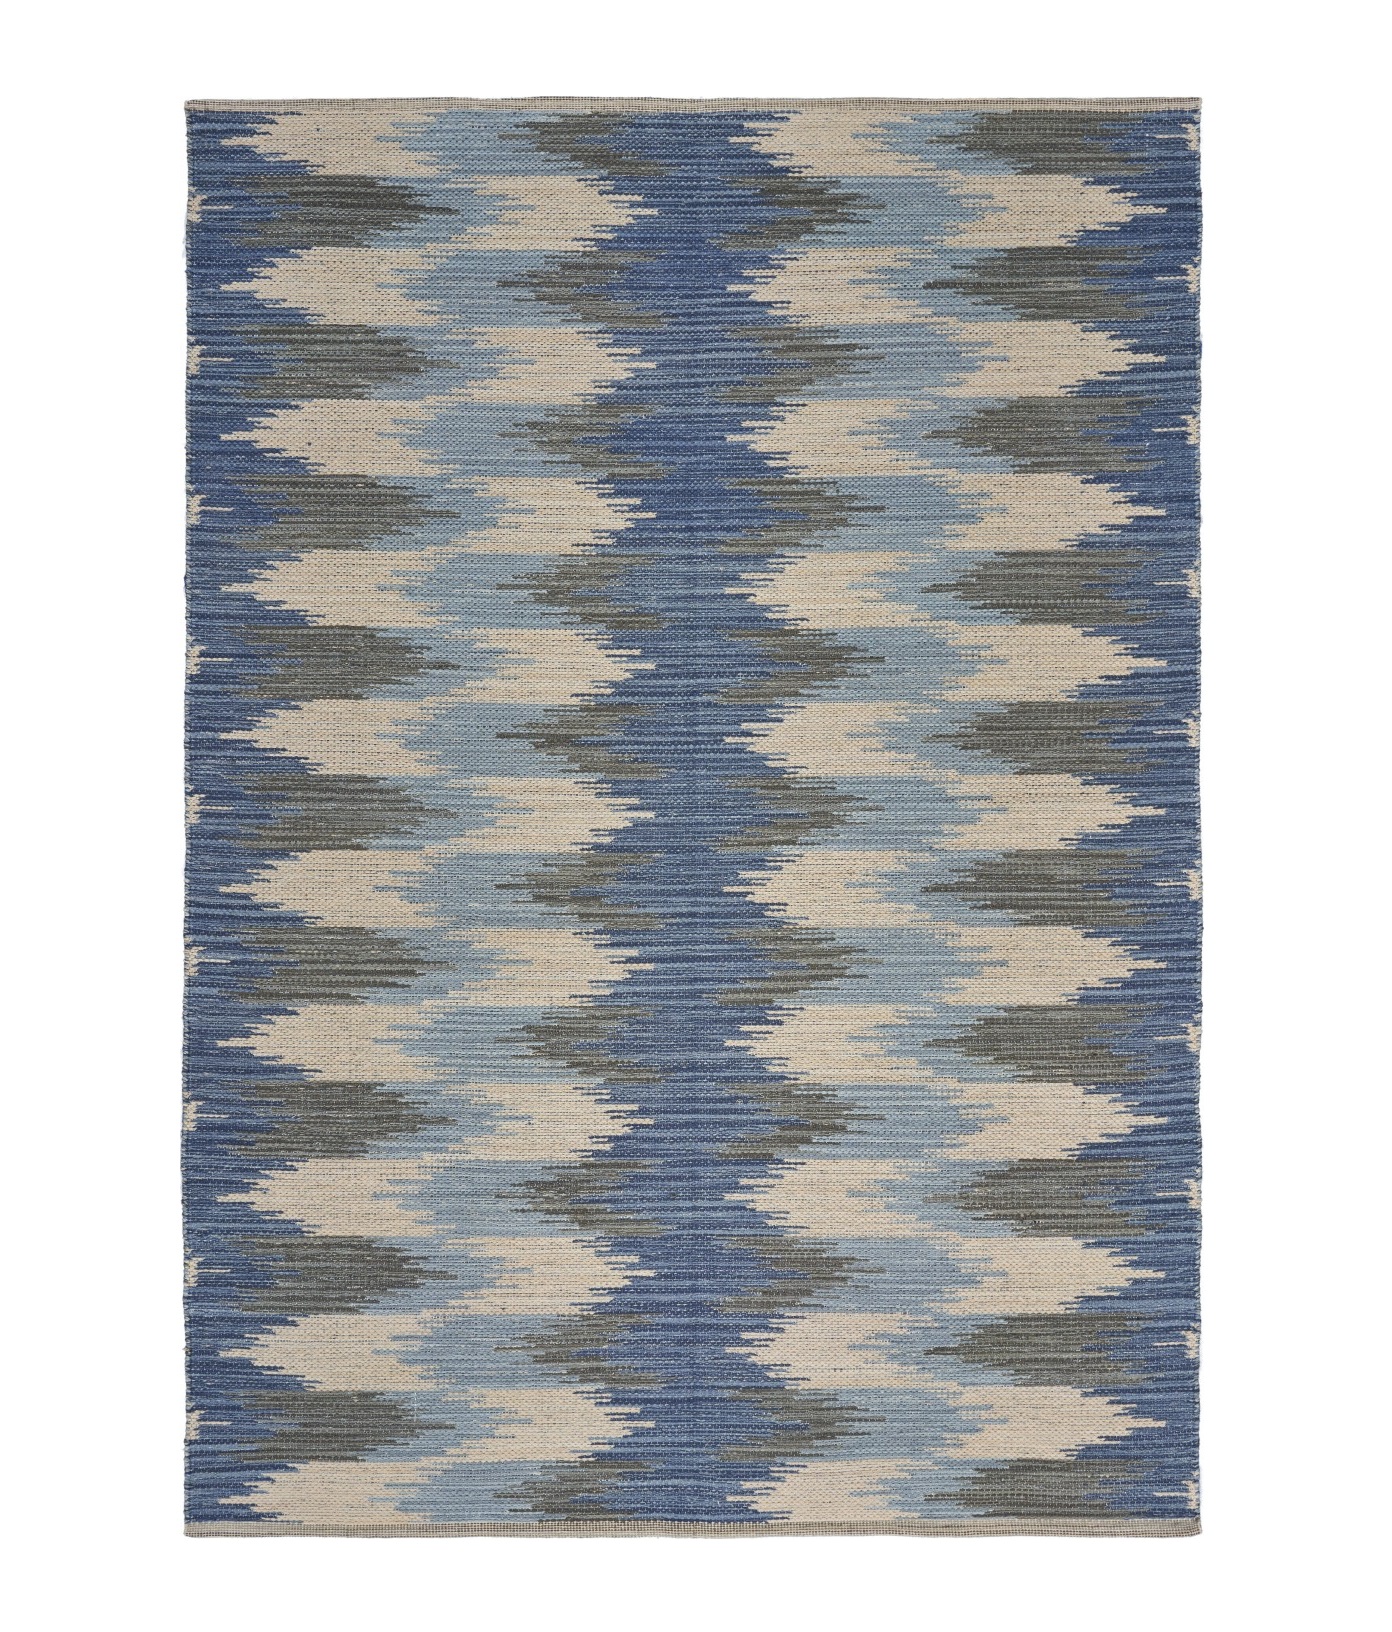 3’ x 4’ Blue and Cream Ikat Pattern Area Rug-395482-1